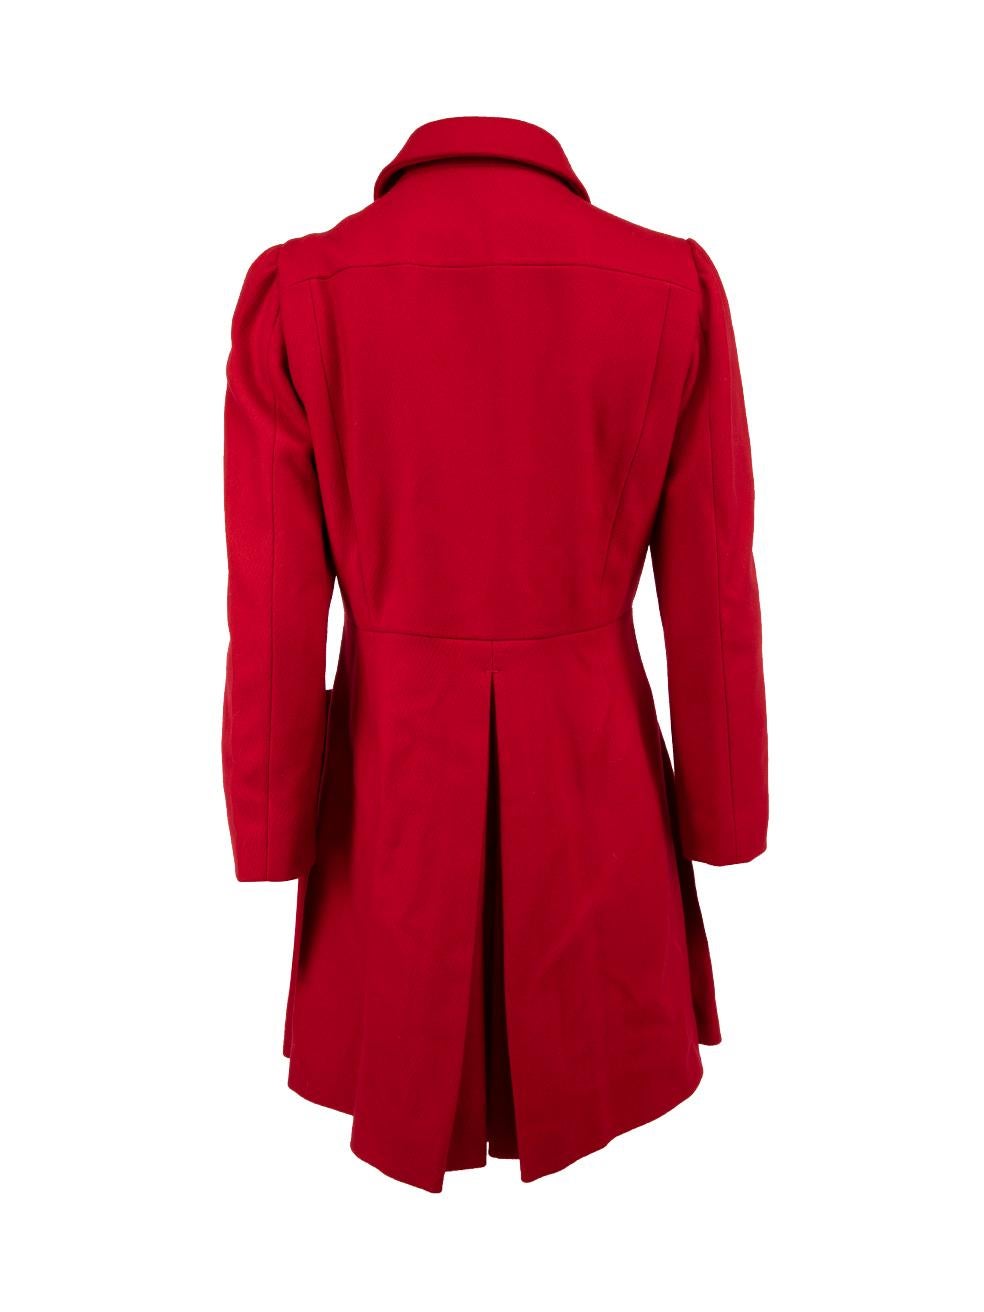 Pre-Loved Miu Miu Women's Red Peacoat with Elasticated Pocket Detail In Excellent Condition In London, GB